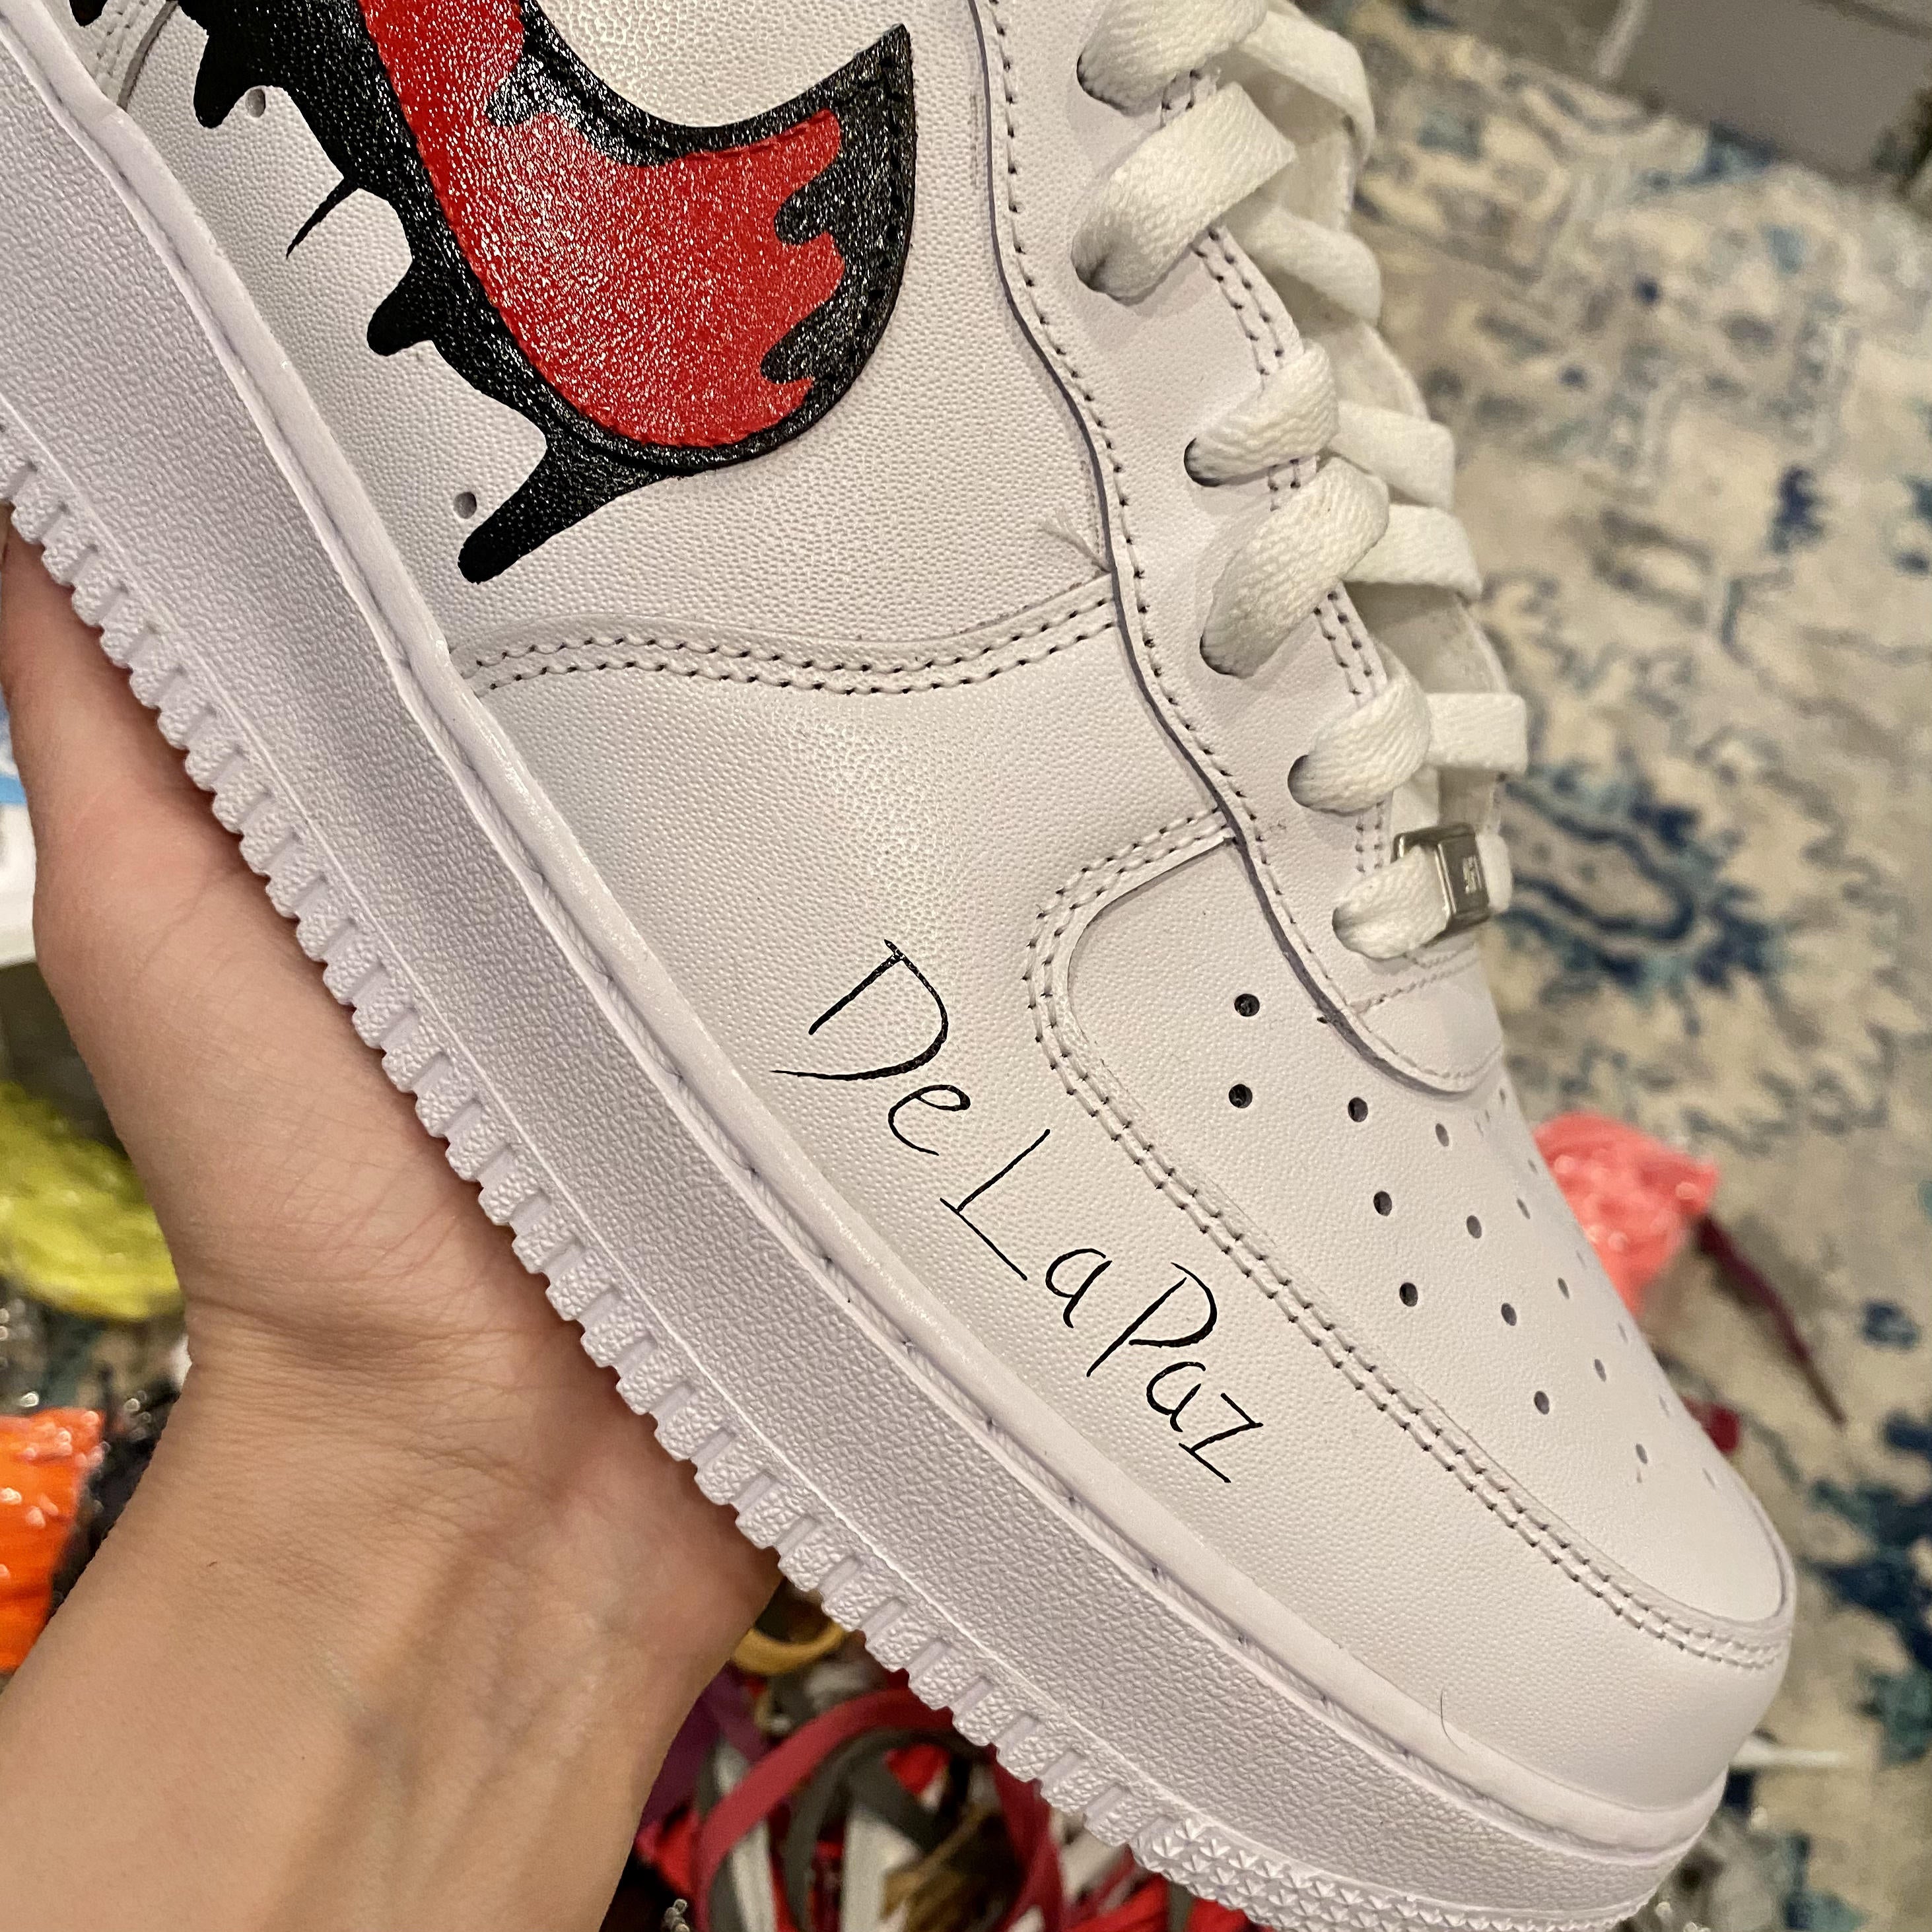 Air Force 1 Custom Low Drip Red Shoes Black Drip & Laces All Sizes